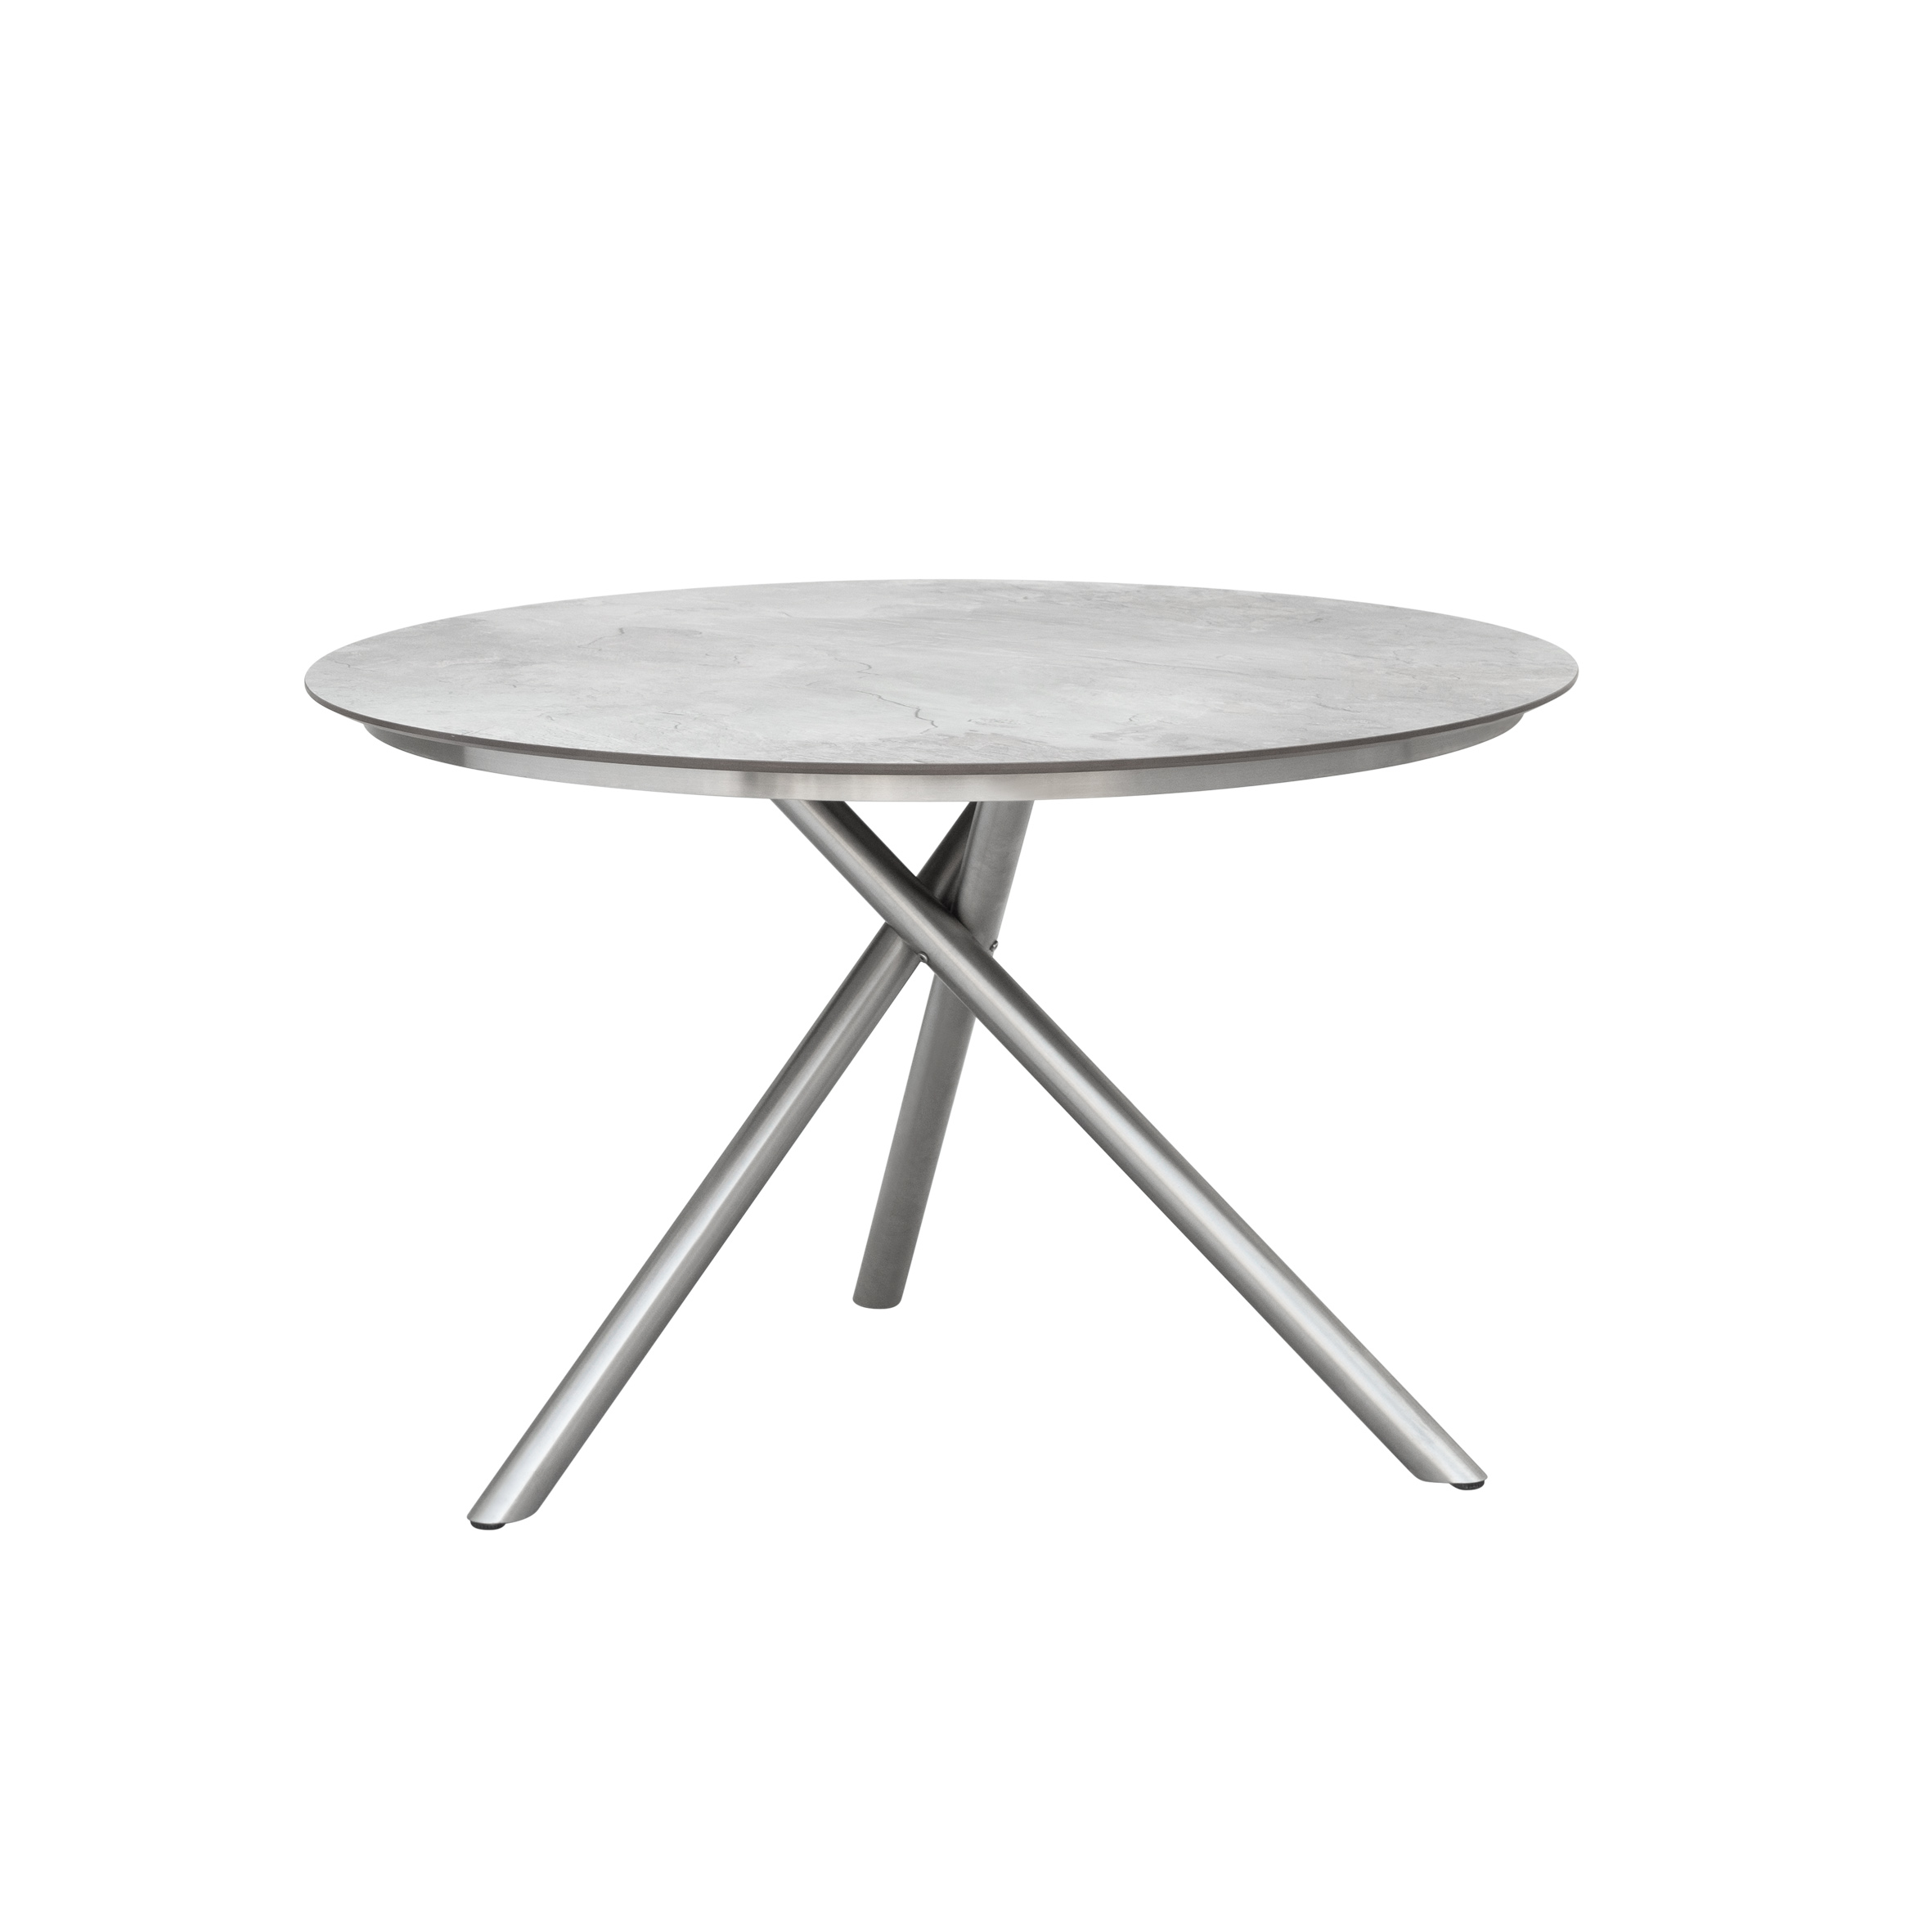 China wholesale Sunbathing Lounge Chair Suppliers –  Rio stainless steel dining table – TAILONG